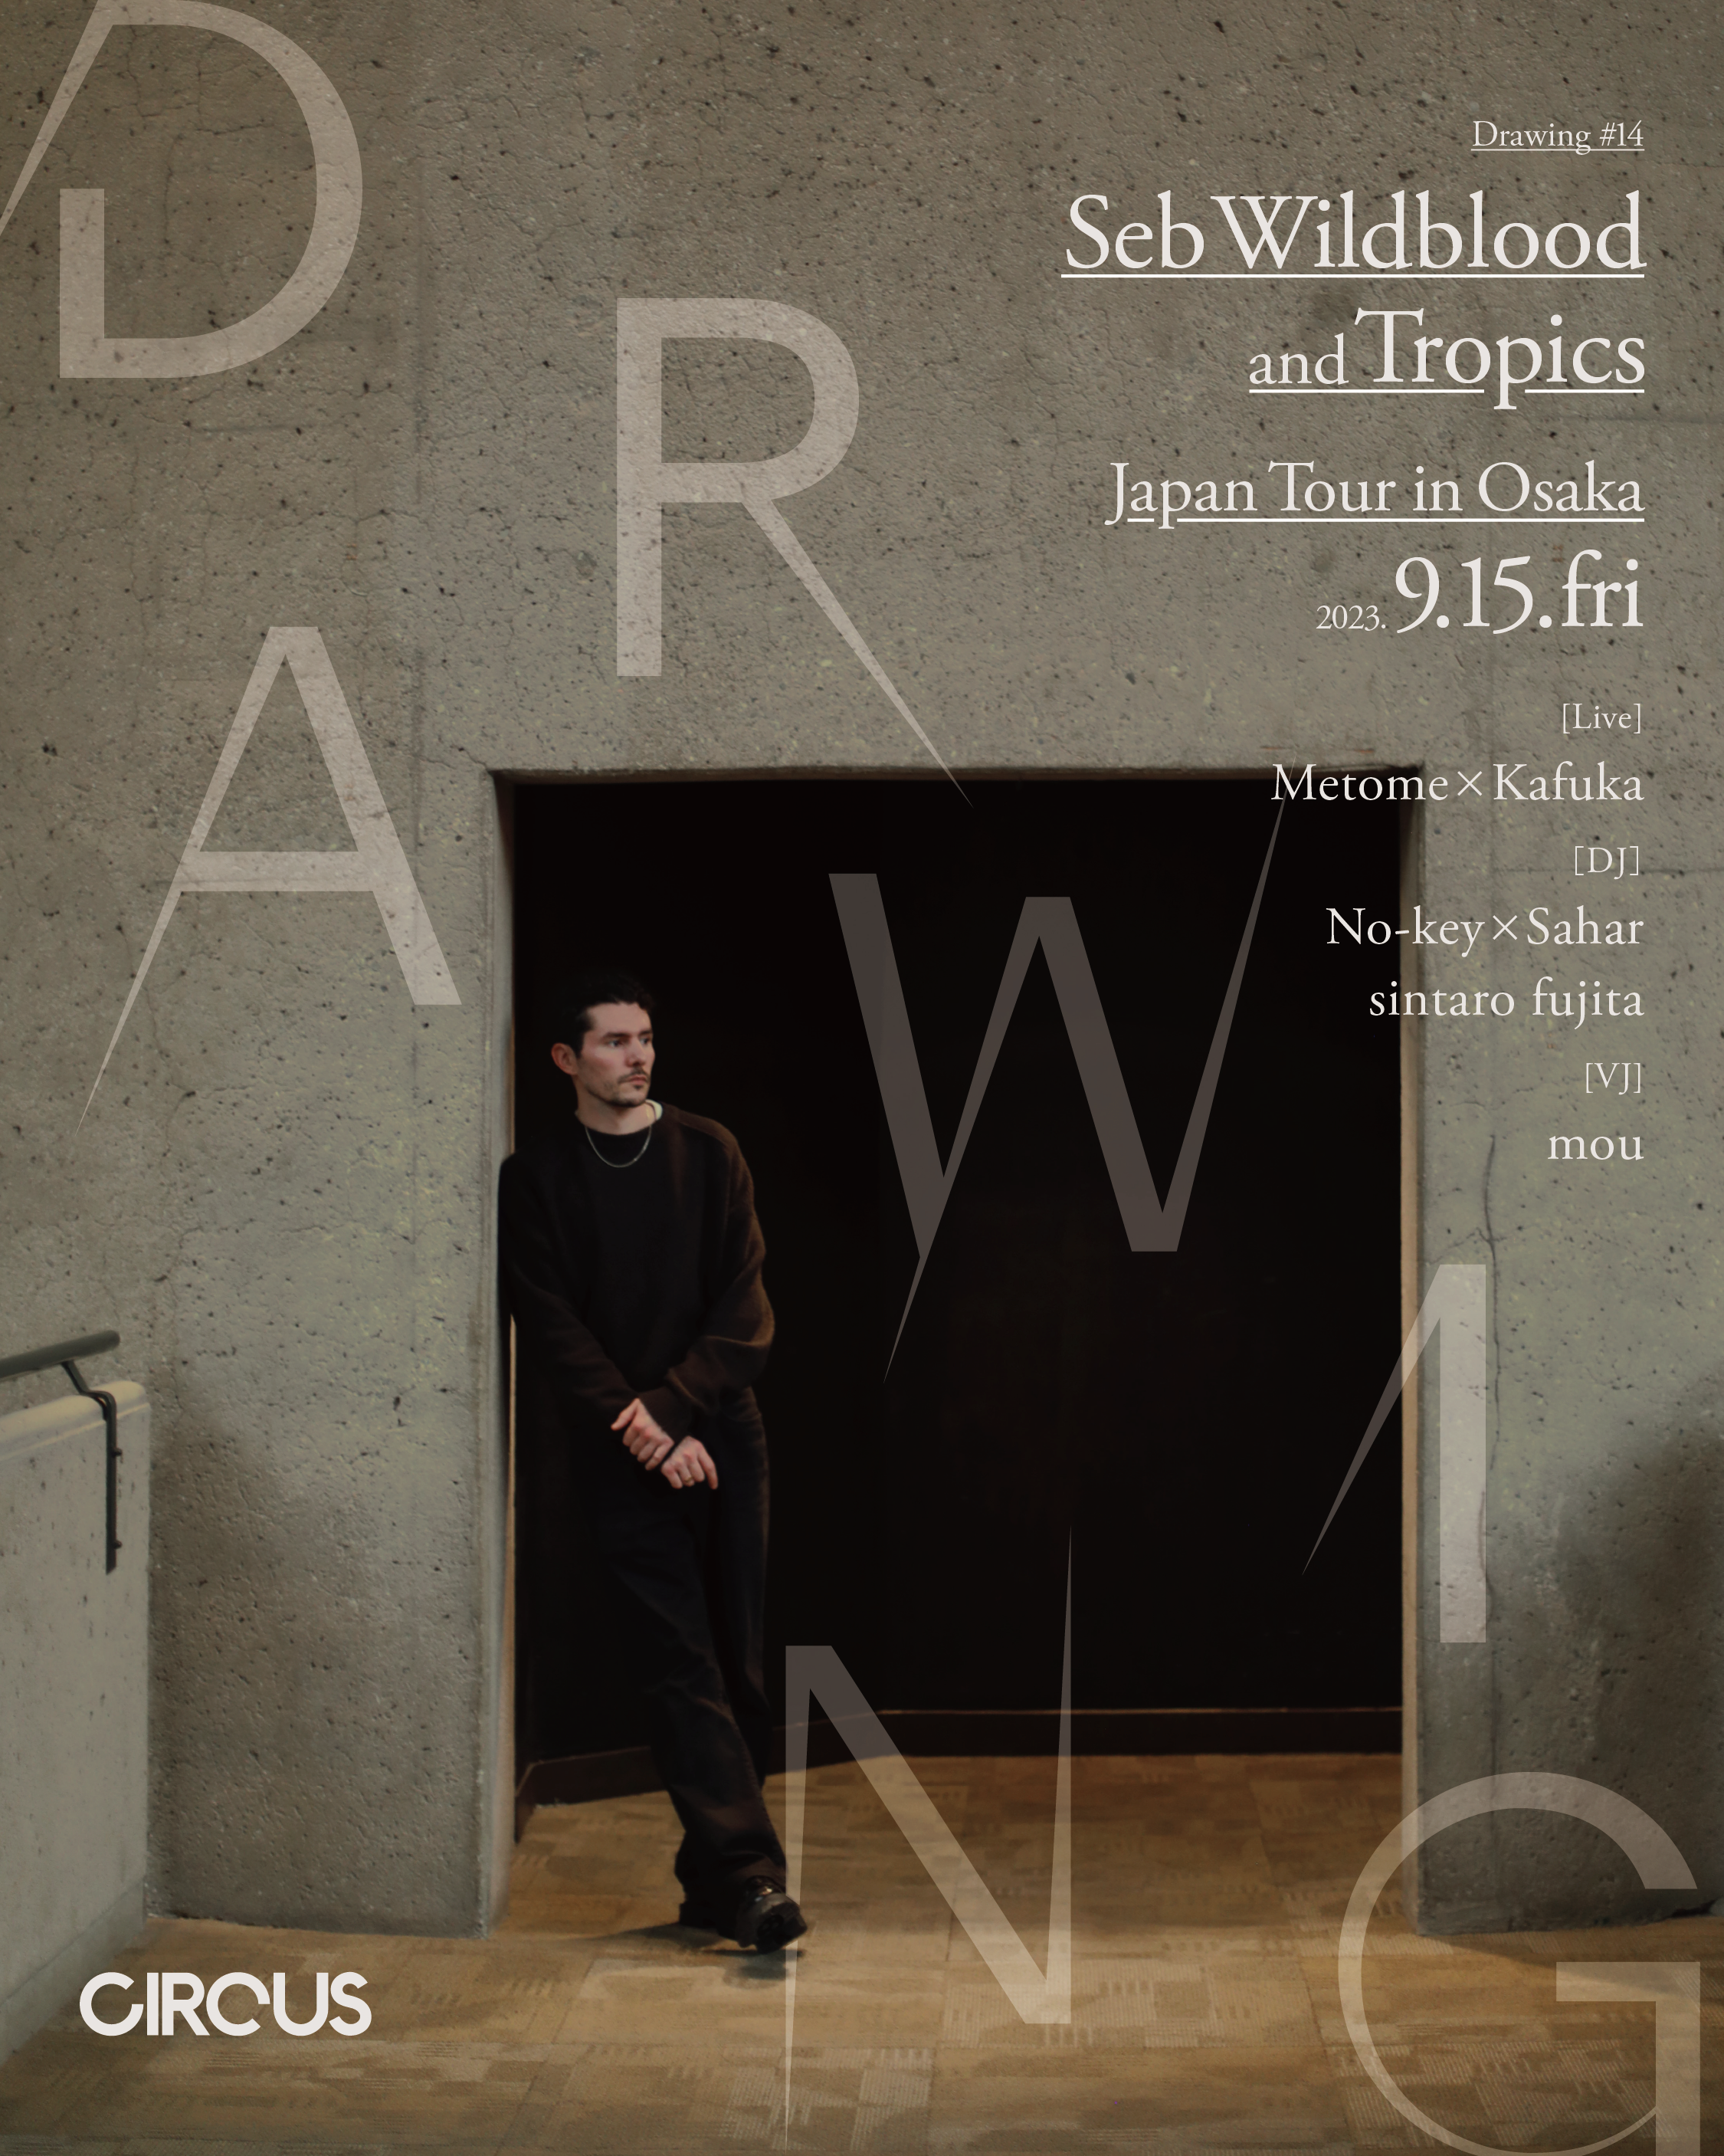 Seb Wildblood and Tropics Japan Tour in Osaka Supported by drawing - フライヤー裏